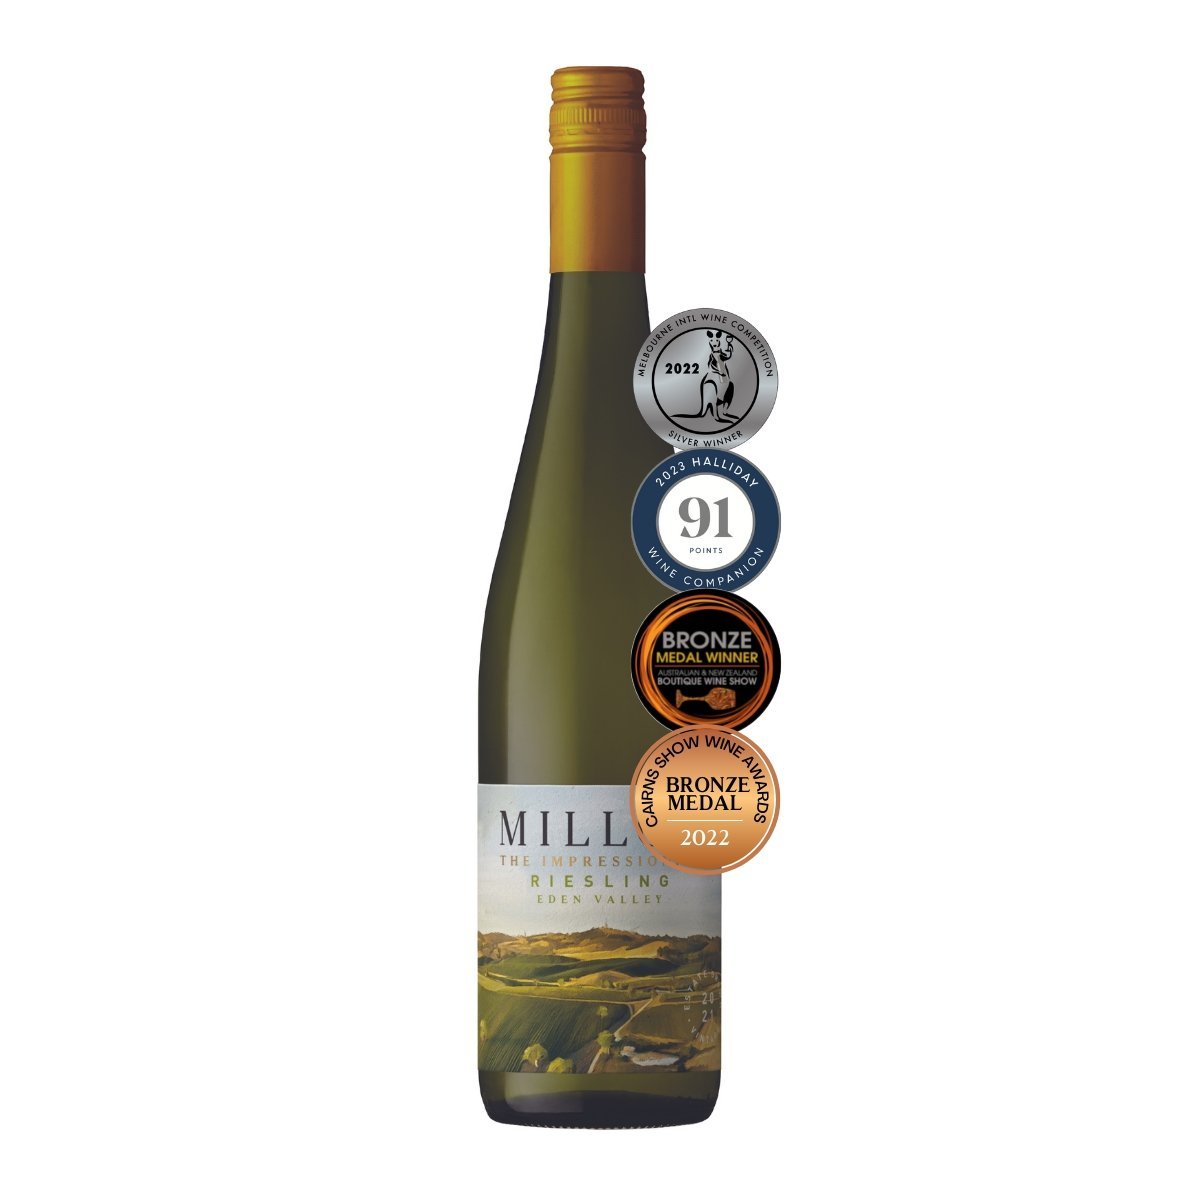 2021 The Impressionist Riesling - Millon Wines